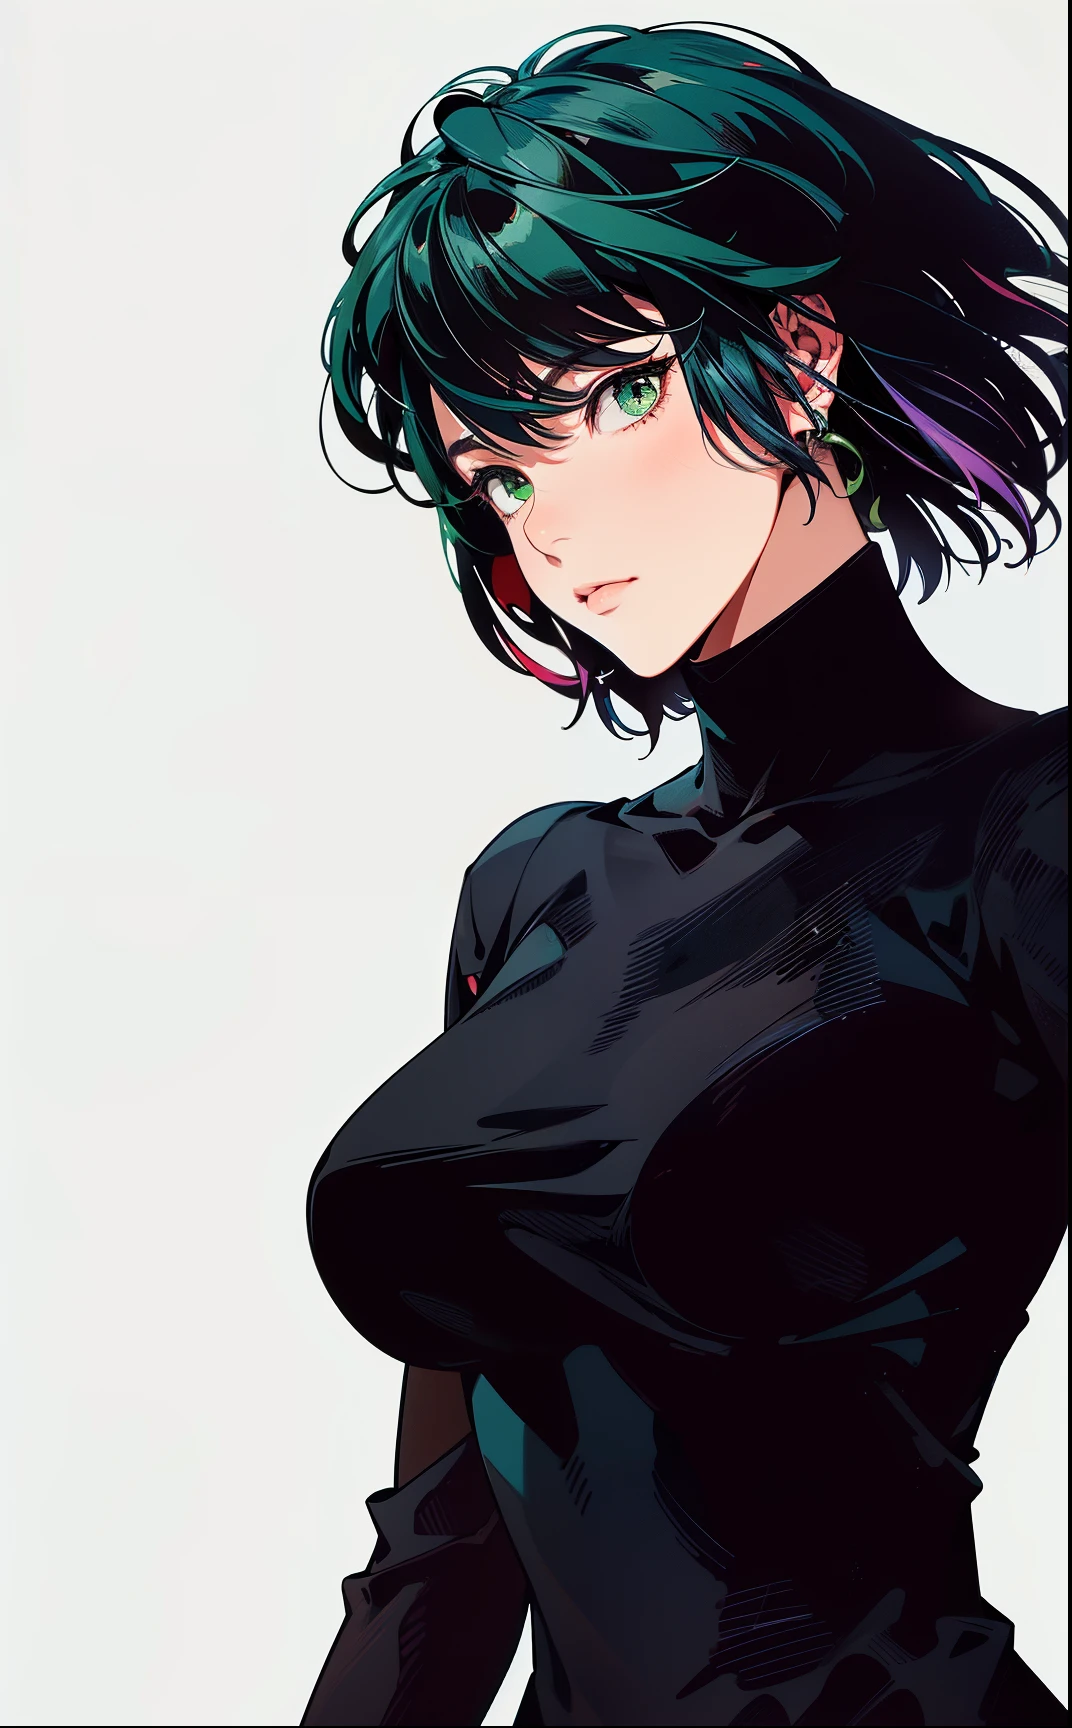 A close-up of a person wearing a black shirt and green hair, Tatsumaki from One Punch Man, Fubuki, Æon Flux style mix, by Kentaro Miura, the style  a mix of Æon flux, Anime girl in a black dress, Art by Kentaro Miura, Portrait of a female anime heroine, Female anime character,  Anime woman, fubuki, green hair, short hair